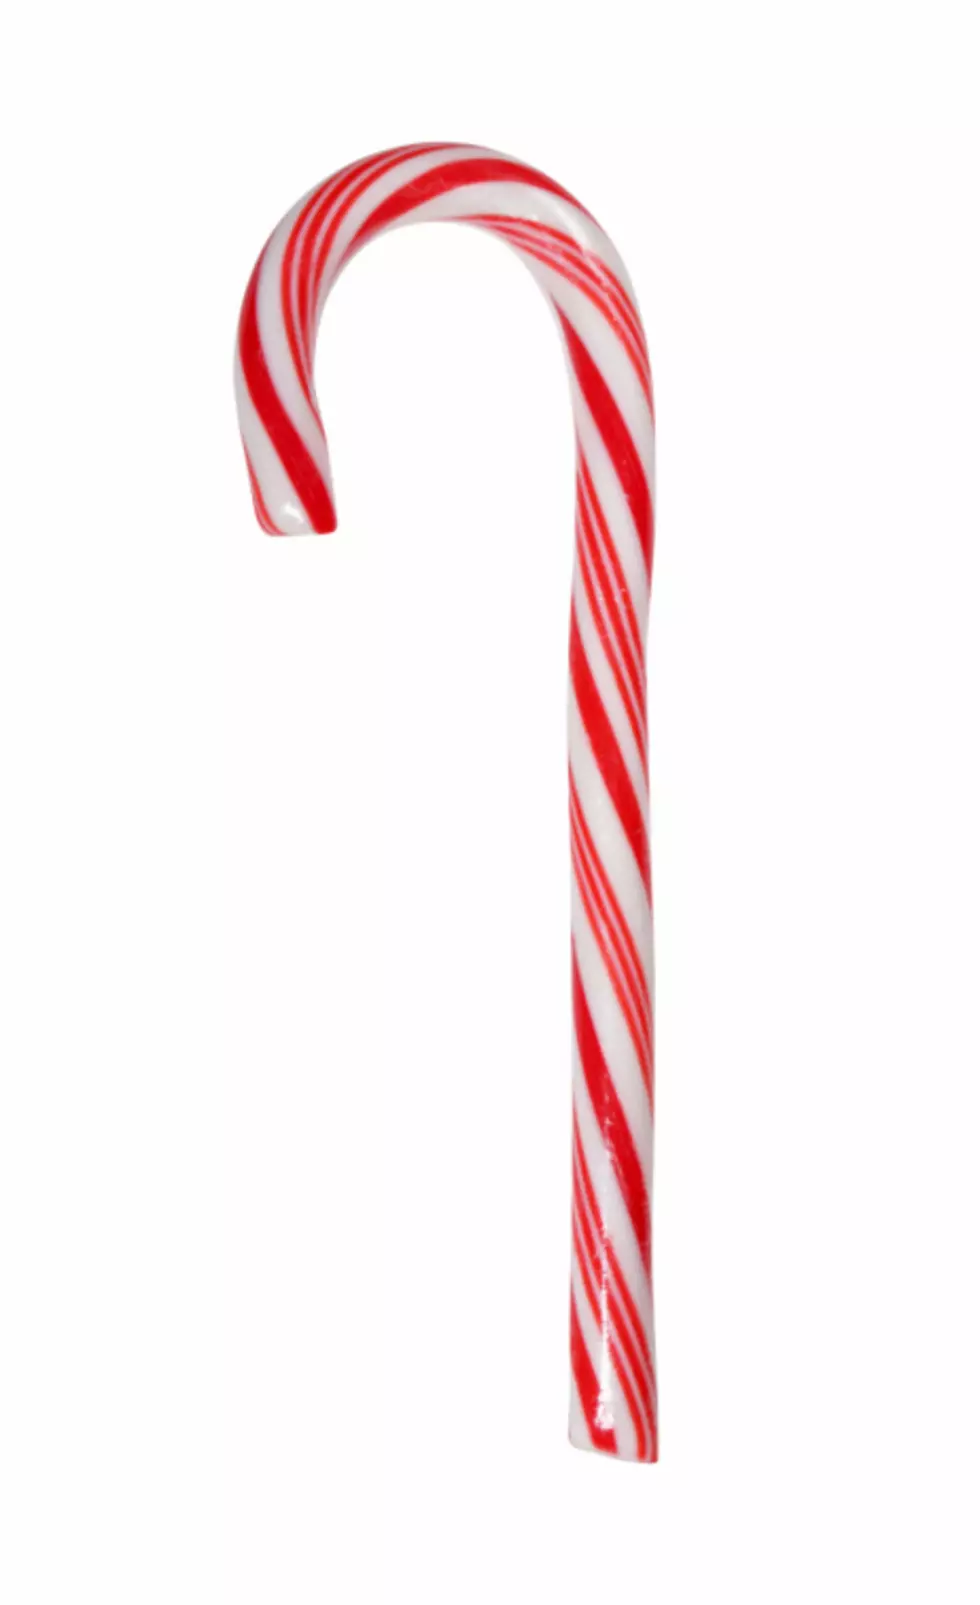 Mac and Cheese Flavored Candy Canes